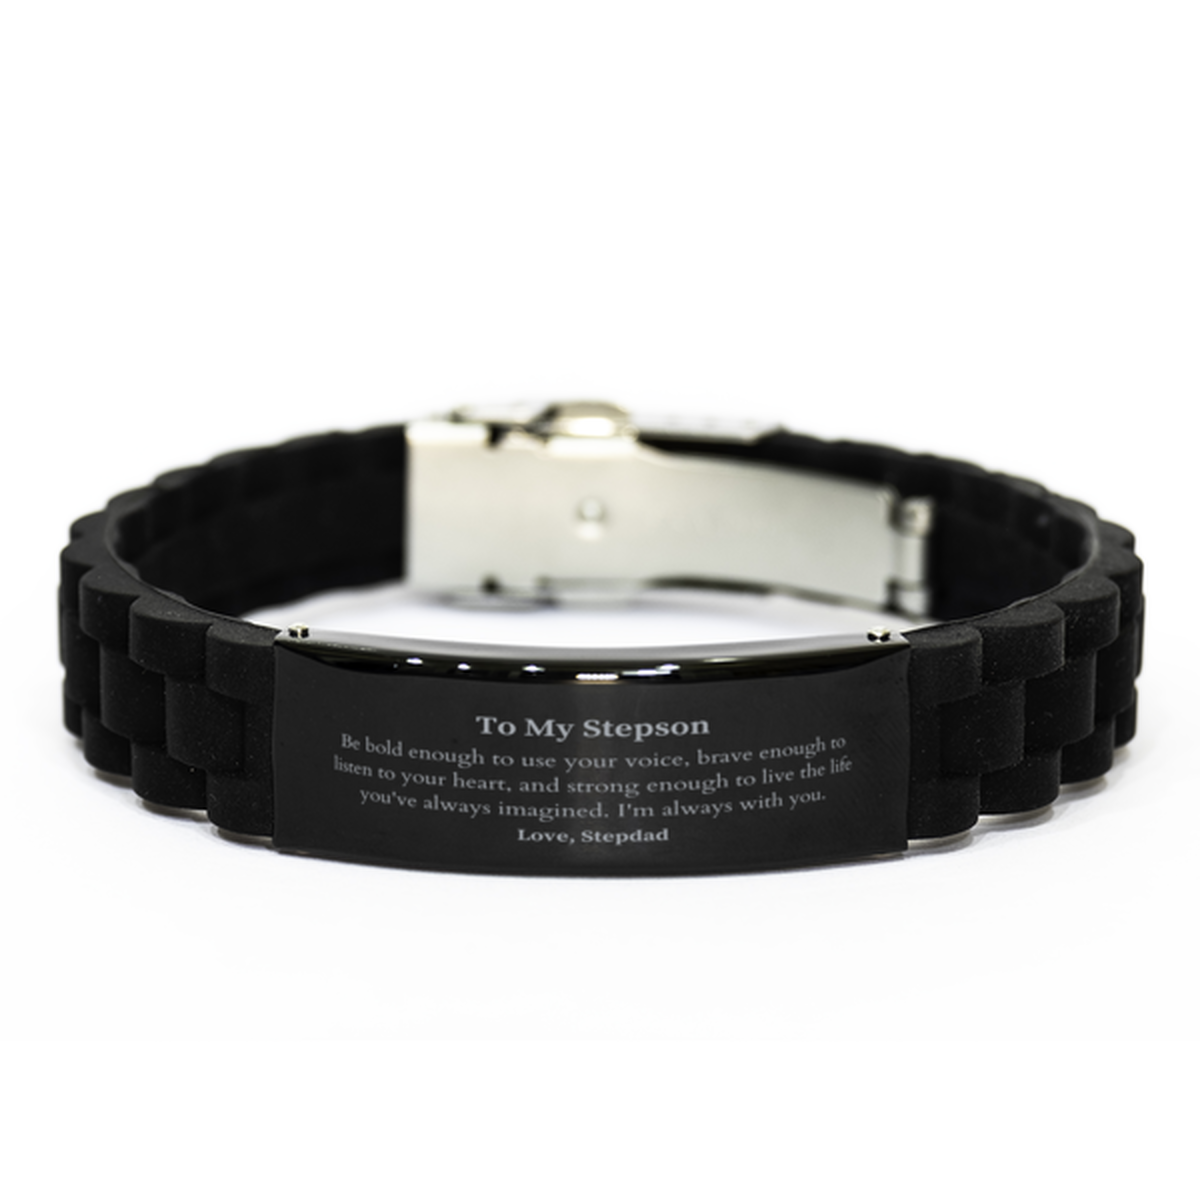 Keepsake Stepson Black Glidelock Clasp Bracelet Gift Idea Graduation Christmas Birthday Stepson from Stepdad, Stepson Be bold enough to use your voice, brave enough to listen to your heart. Love, Stepdad